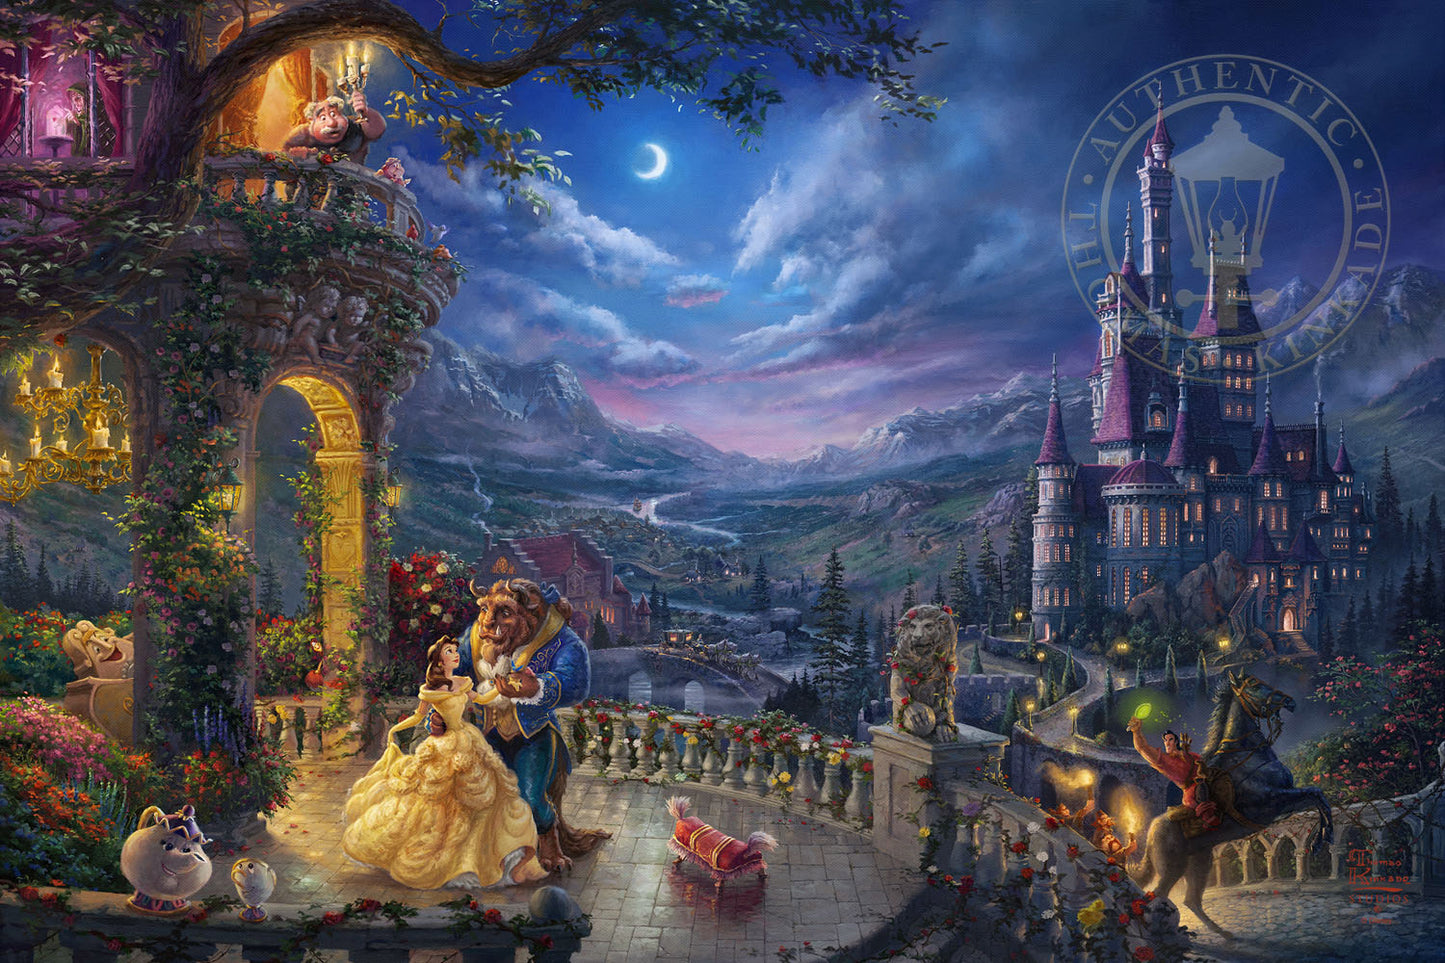 Thomas Kinkade Studios "Beauty and the Beast Dancing in the Moonlight" Limited and Open Canvas Giclee